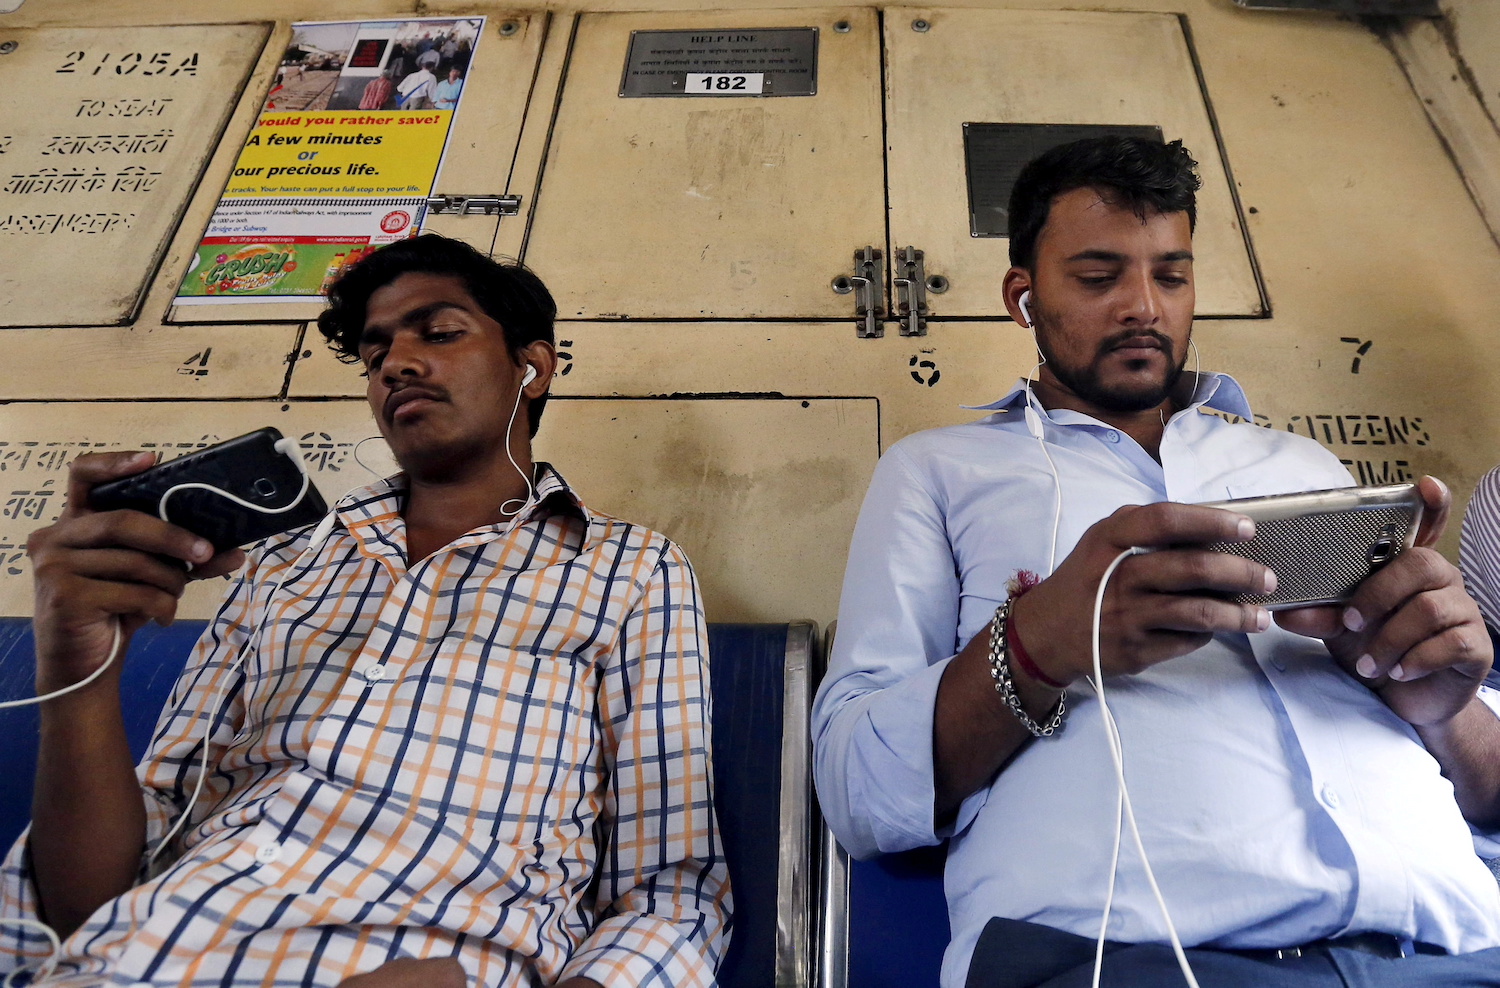 Commuters play video games on their mobile phones